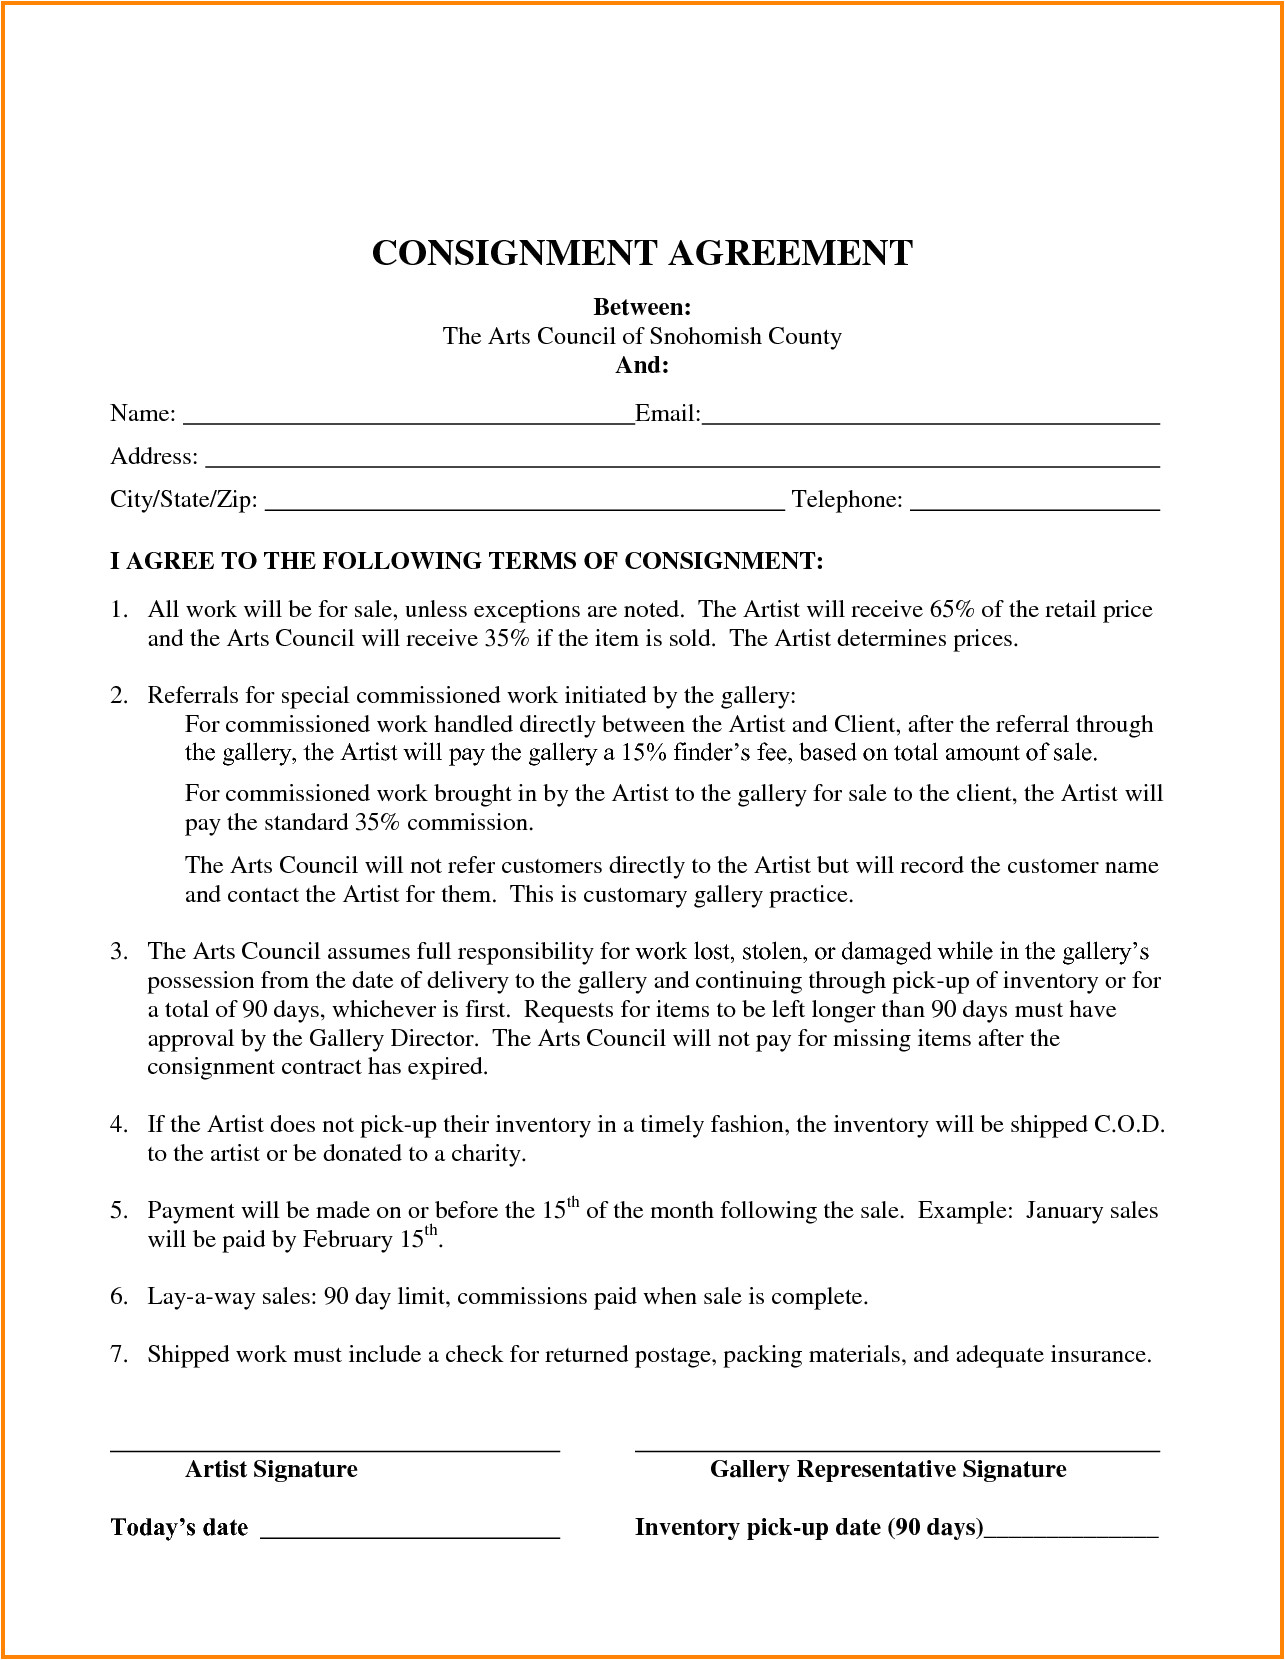 consignment inventory agreement template